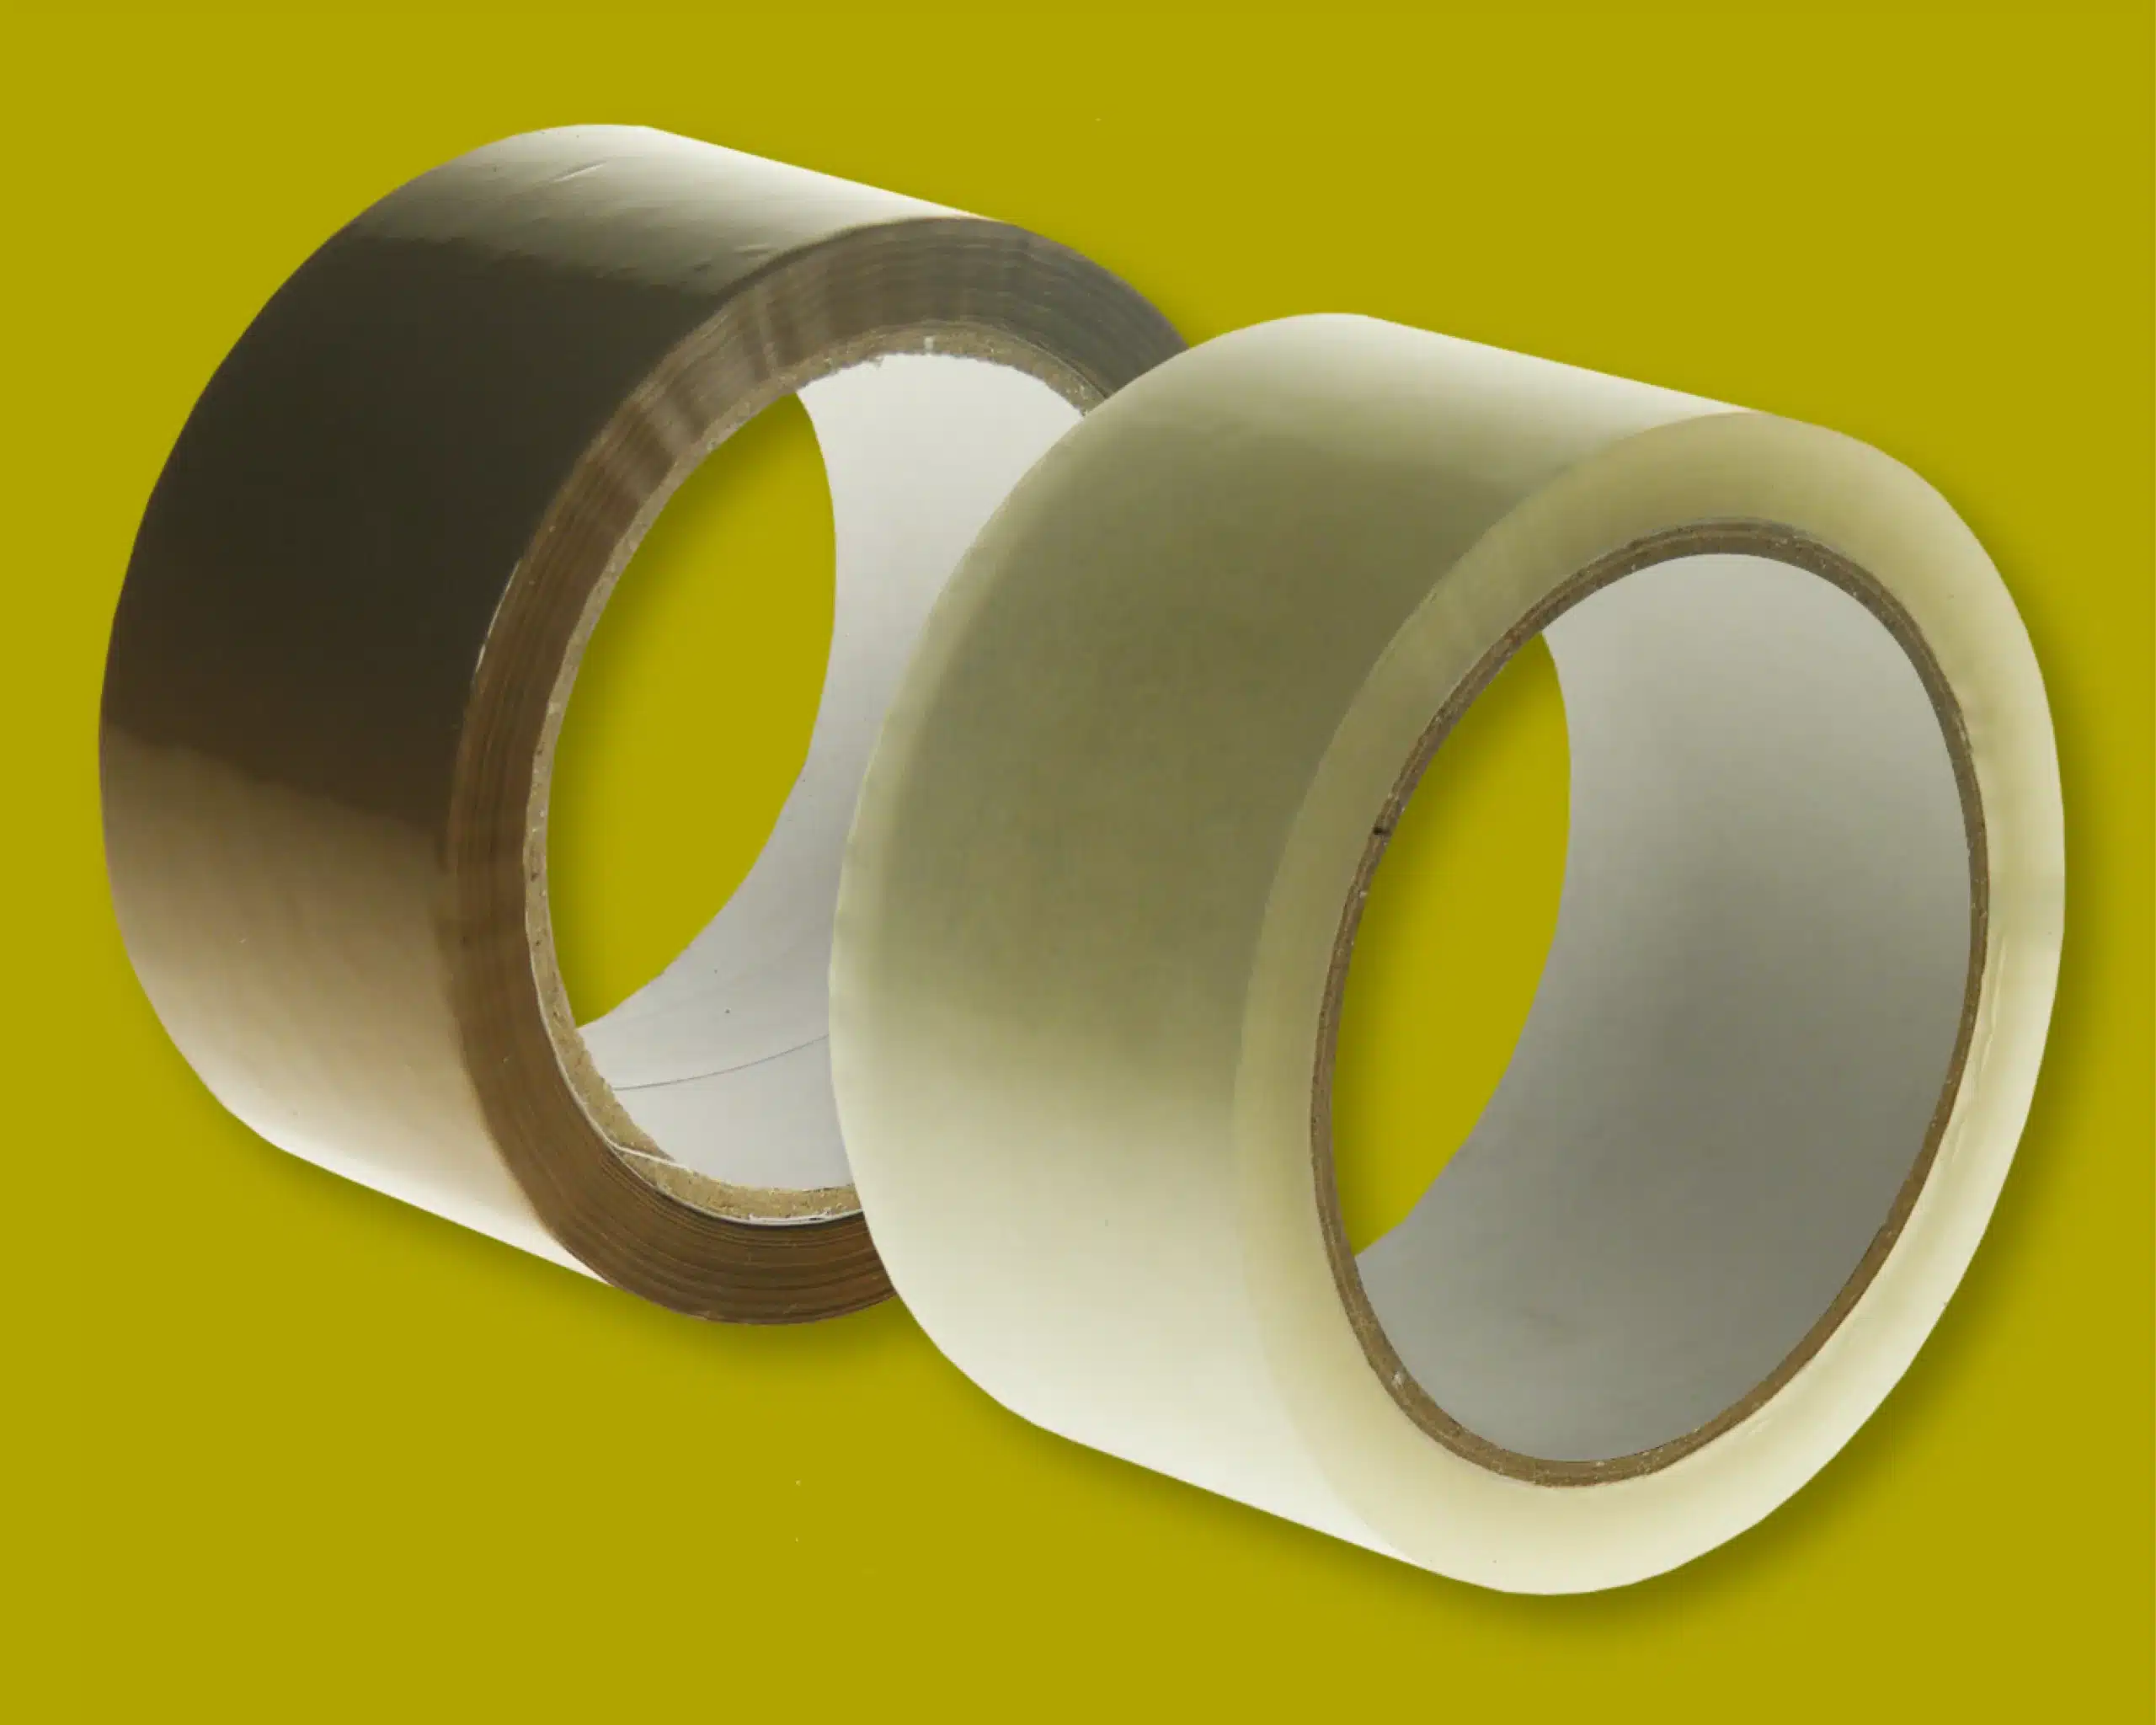 Multi-Purpose Strong Yellow Tape - Colored Packing Tape Polypropylene  Strong Adhesive Tape for Packing Sealing Identification Craft Decorative